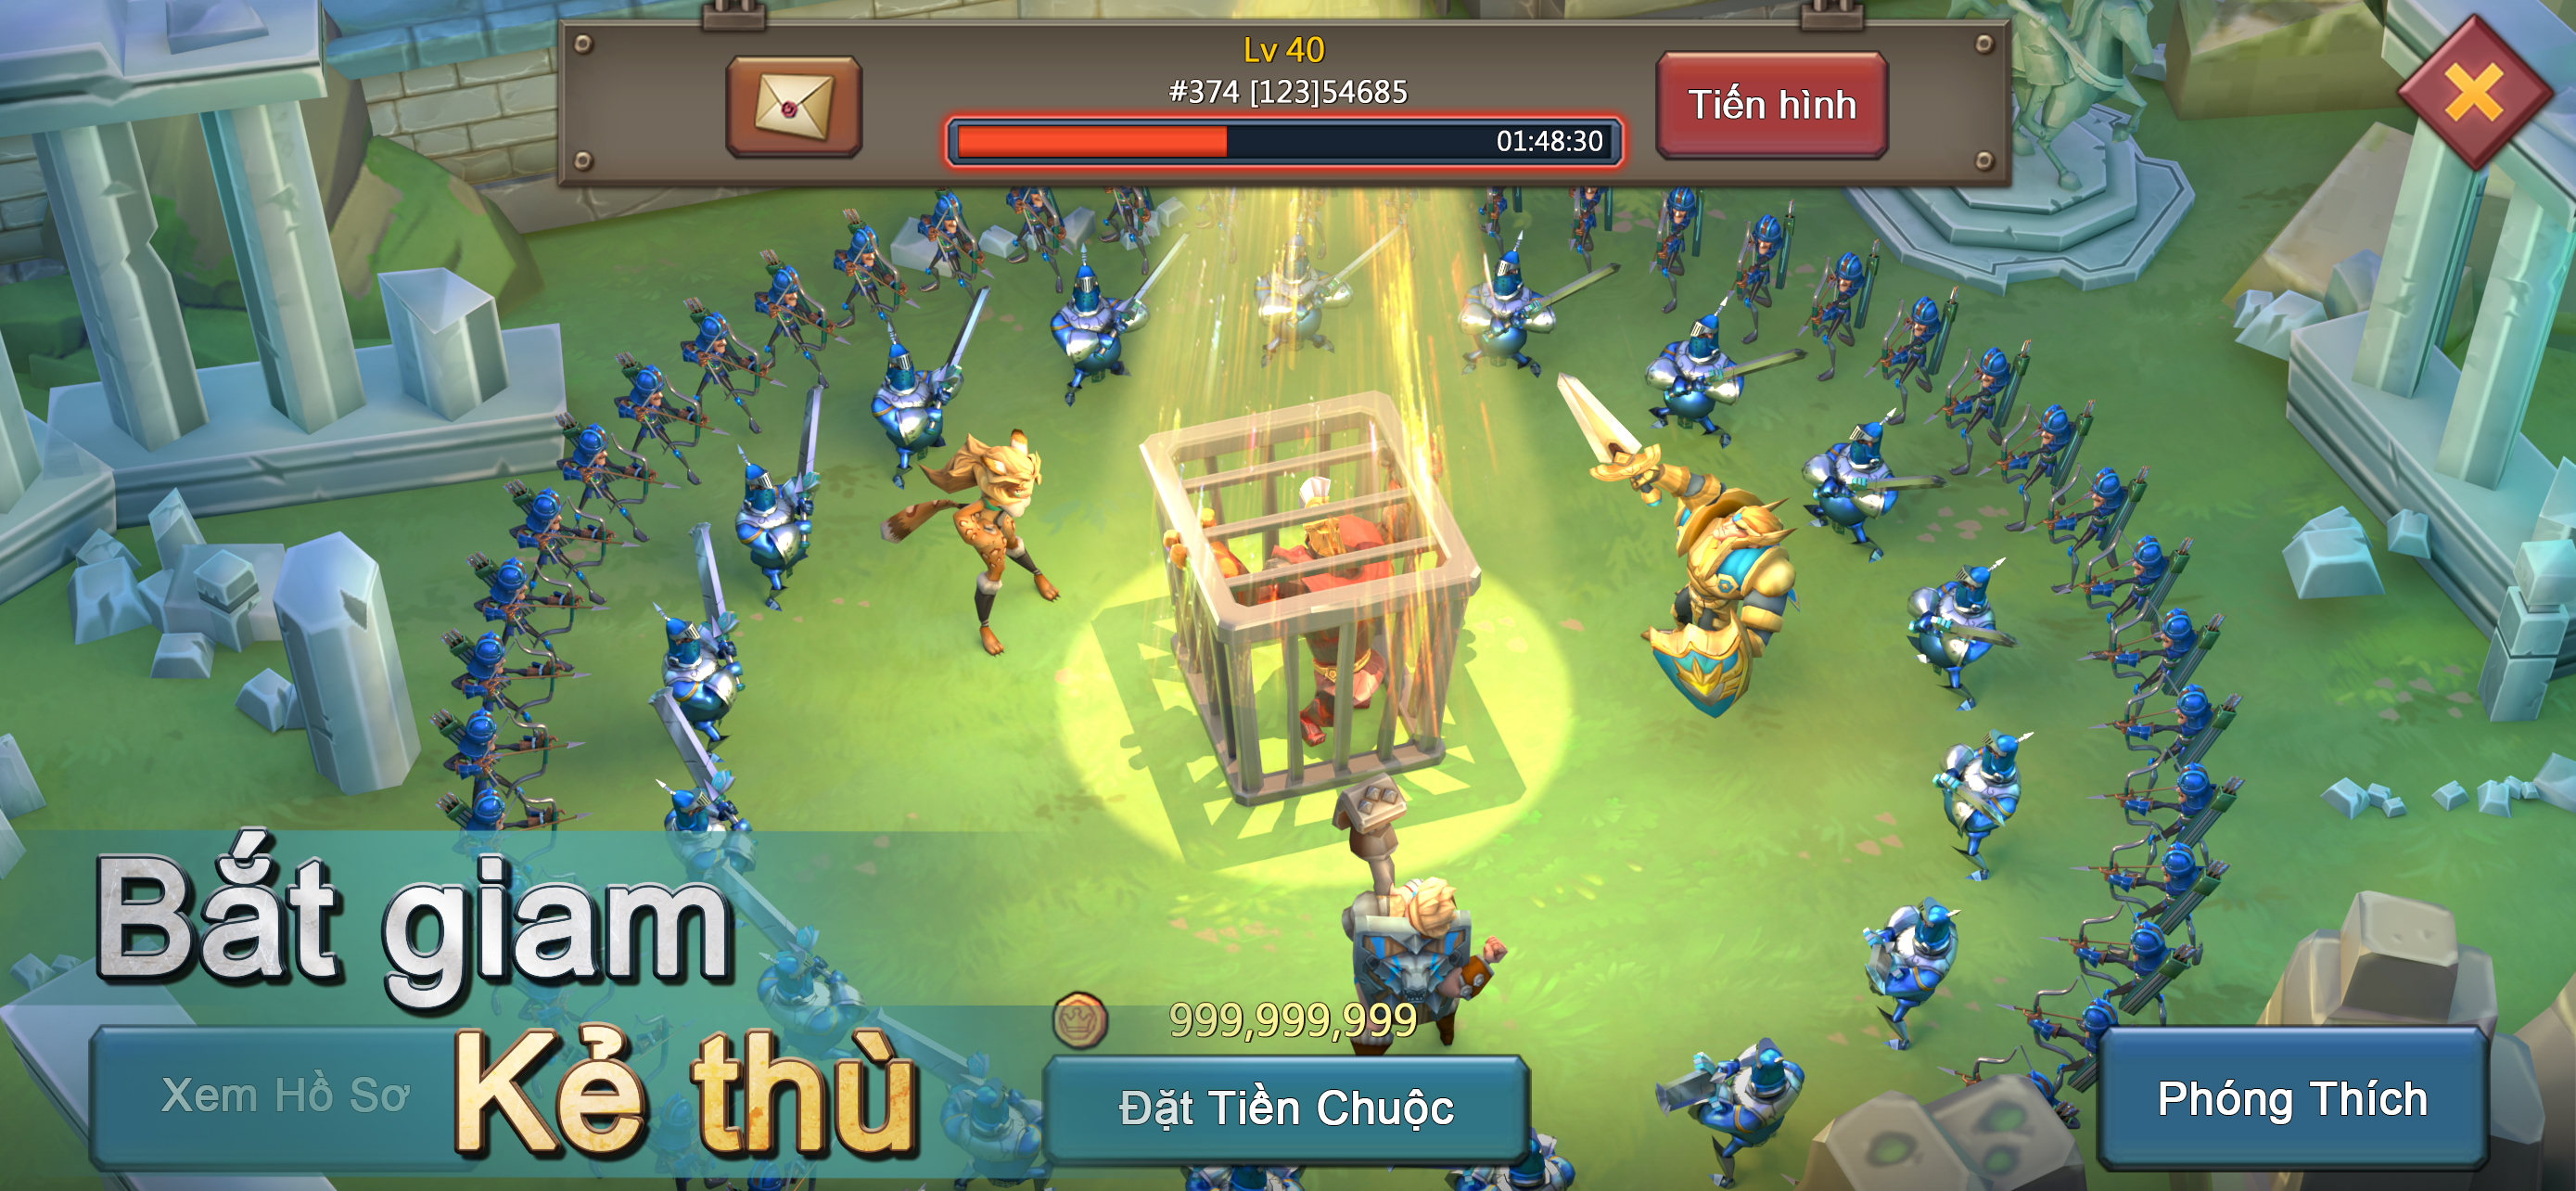 Lords Mobile - Gamota Codes (New) - Buma Review